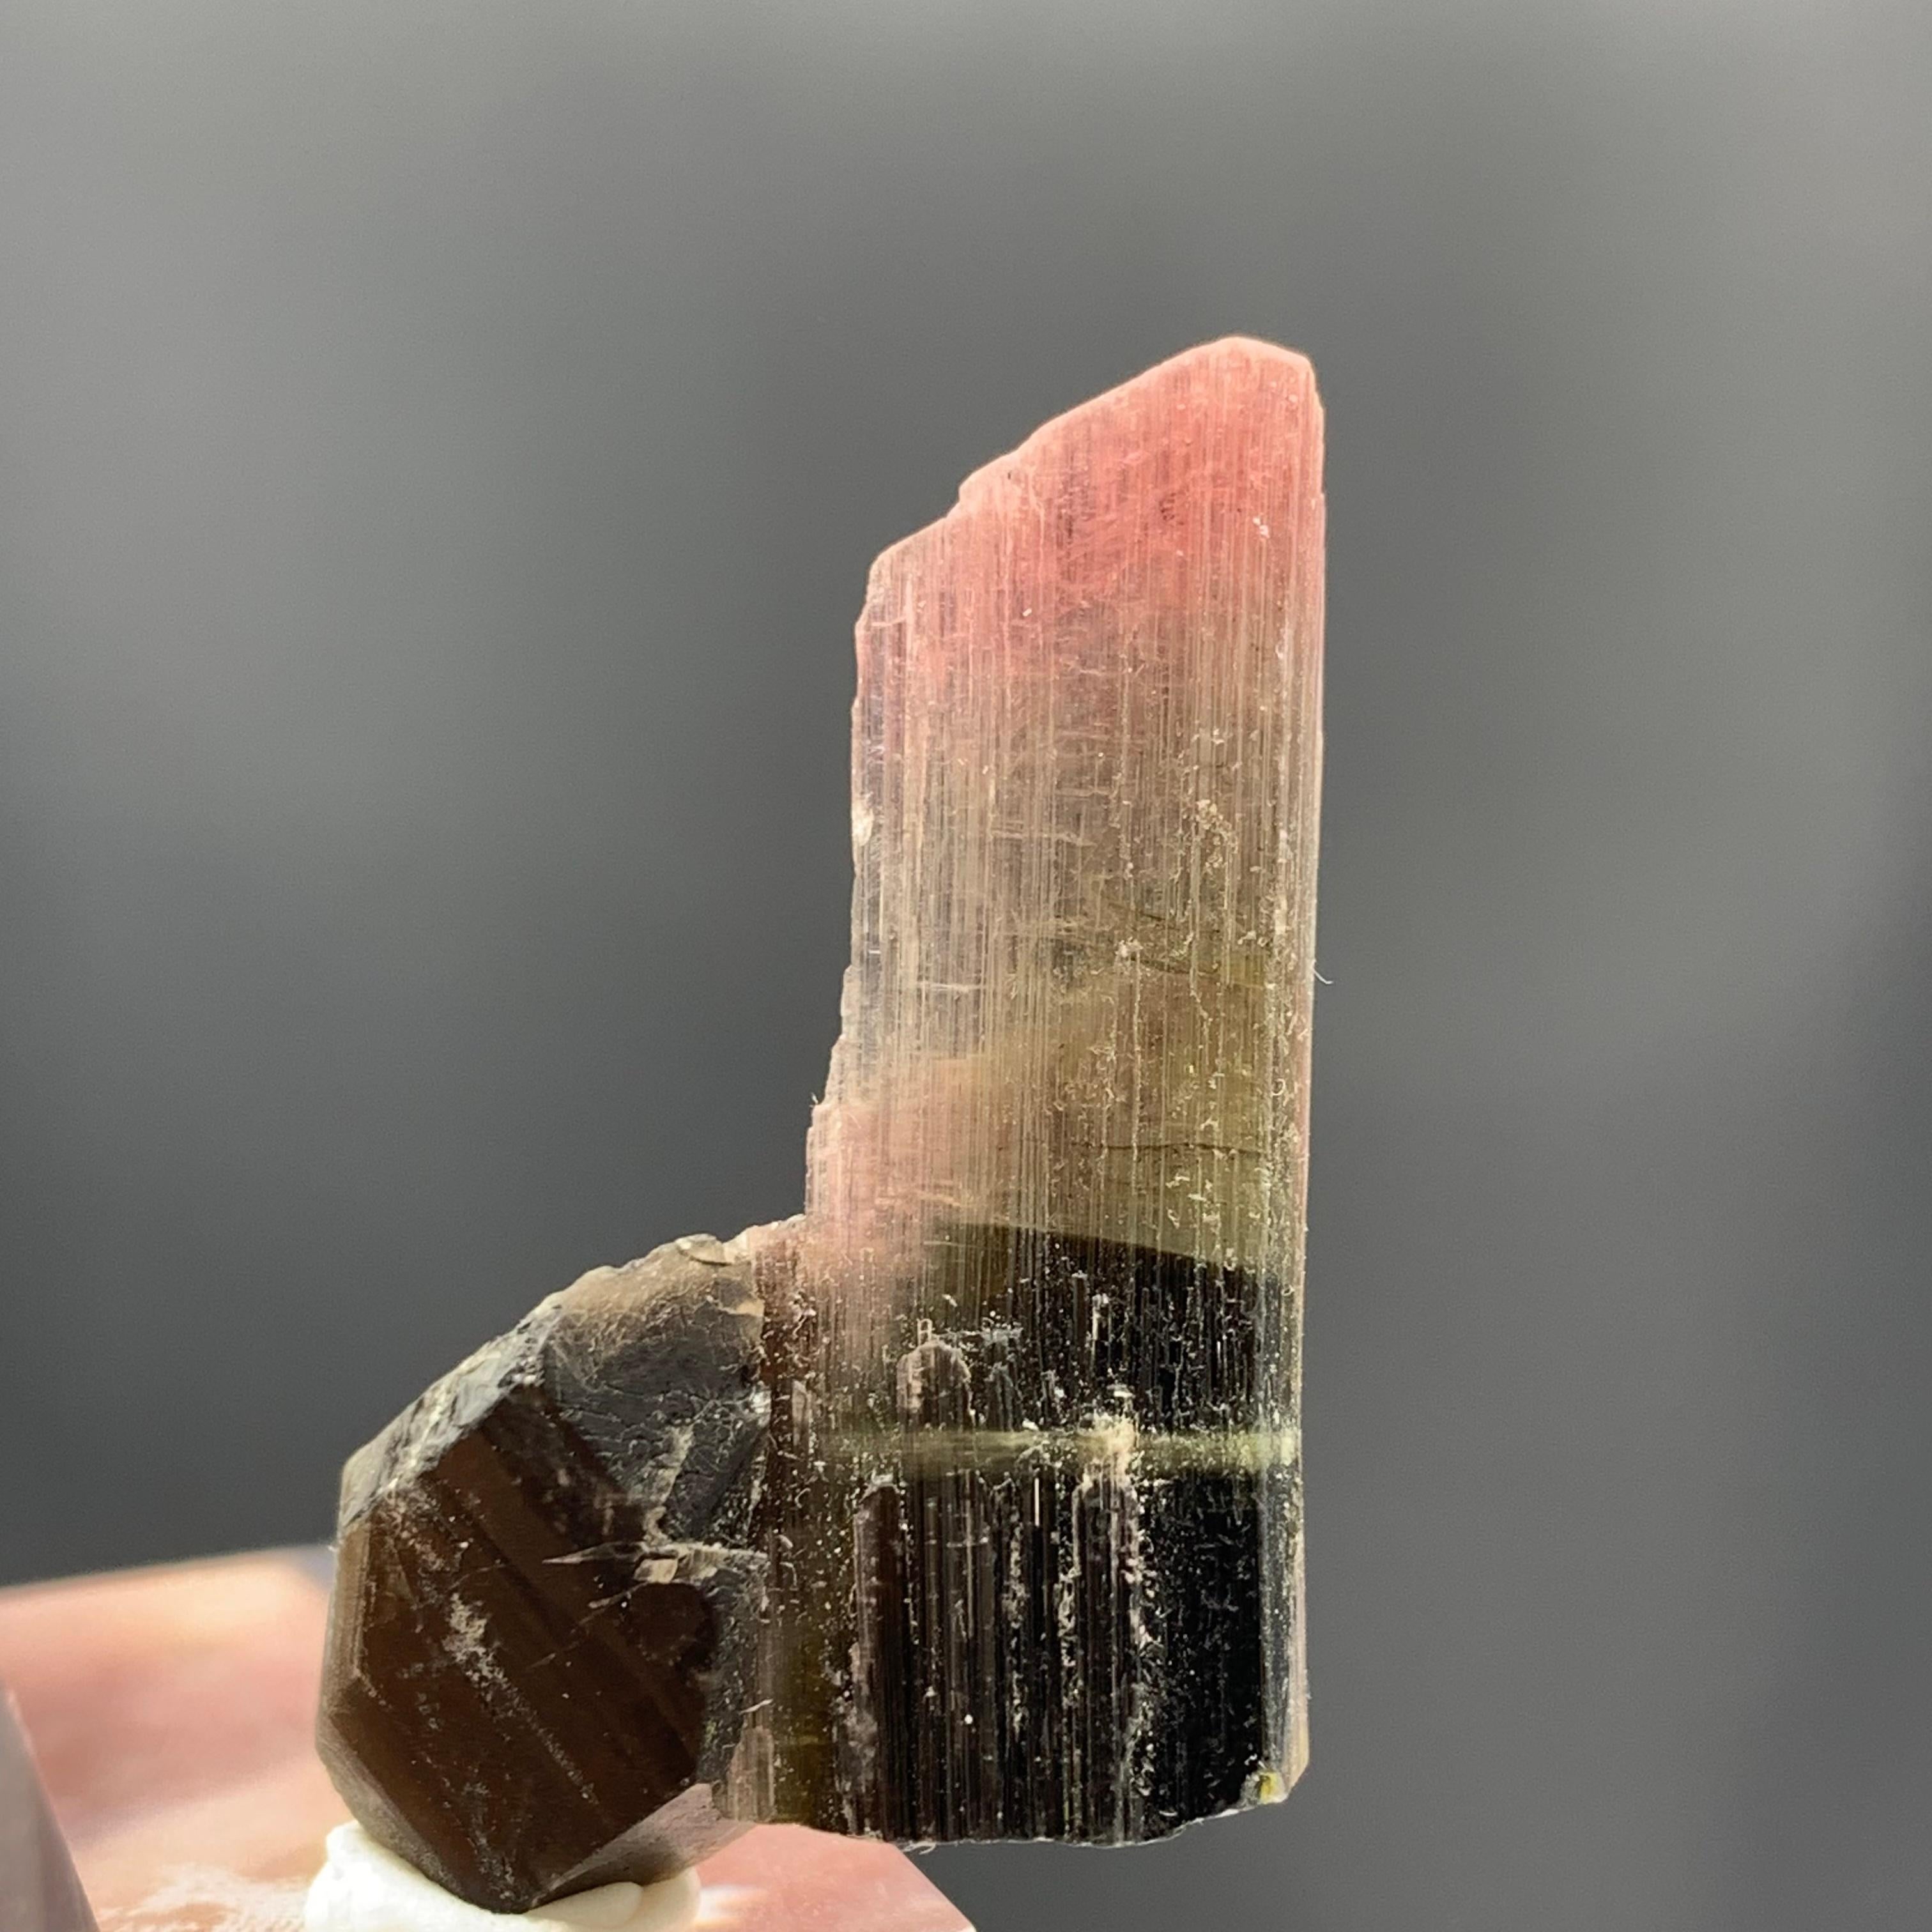 27.25 Carat Magnifique Tri Color Tourmaline Crystal From Afghanistan 
Weight: 27.25 carat 
Dimension: 3.2 x 2.2 x 0.7 Cm
Origin: Afghanistan 

Tourmaline is a crystalline silicate mineral group in which boron is compounded with elements such as